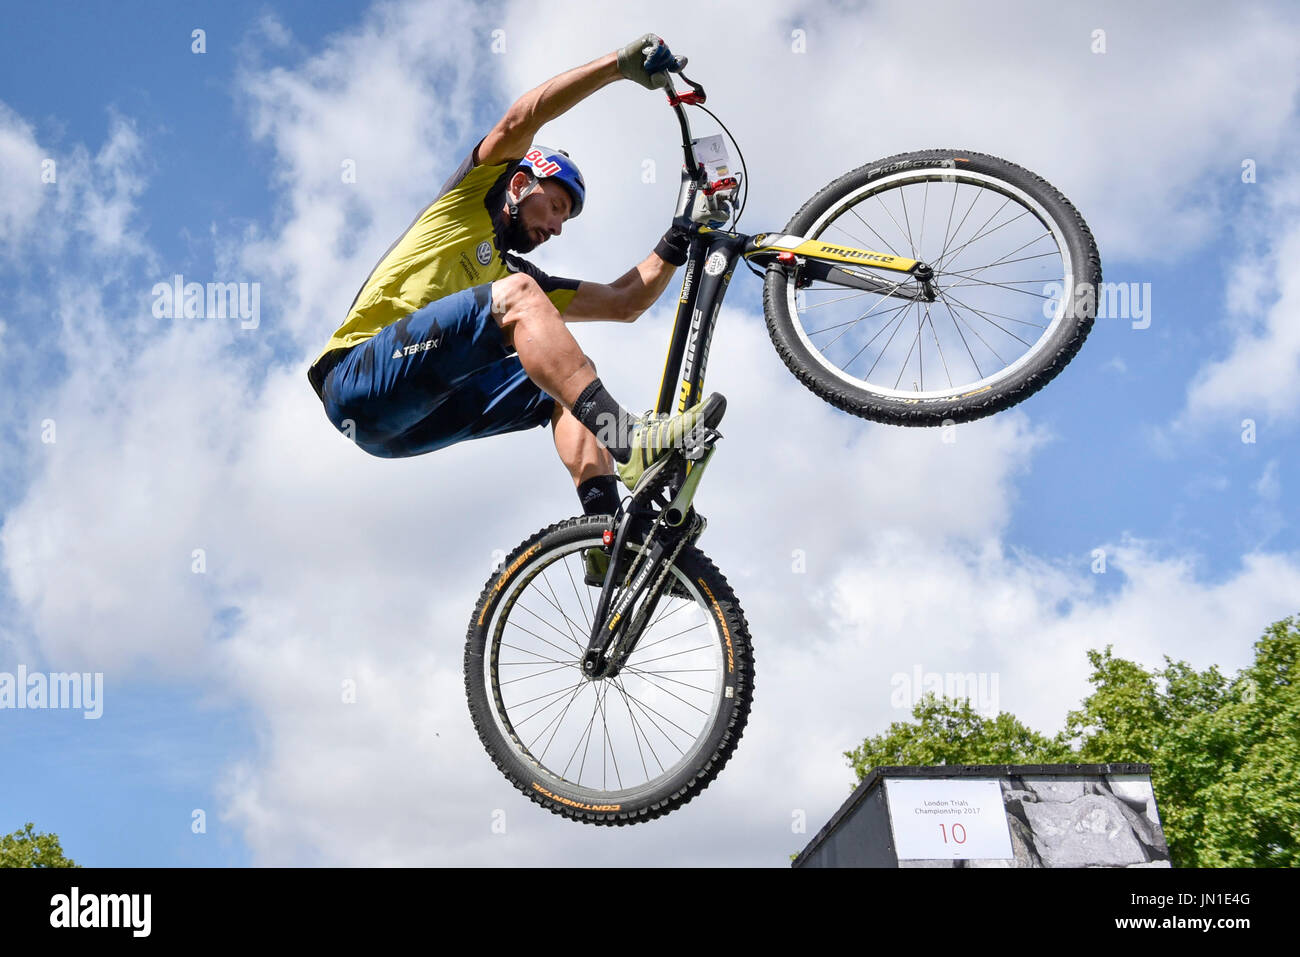 London, UK.  29 July 2017.  Members of the Andrei Burton stunt riding team take part in the London Trials Championships in Green Park tackling a course made up of tricky obstacles.  The event is part of Prudential RideLondon FreeCycle, a three day celebration of cycling taking place in the capital with over 100,000 people participating over the weekend.   Credit: Stephen Chung / Alamy Live News Stock Photo